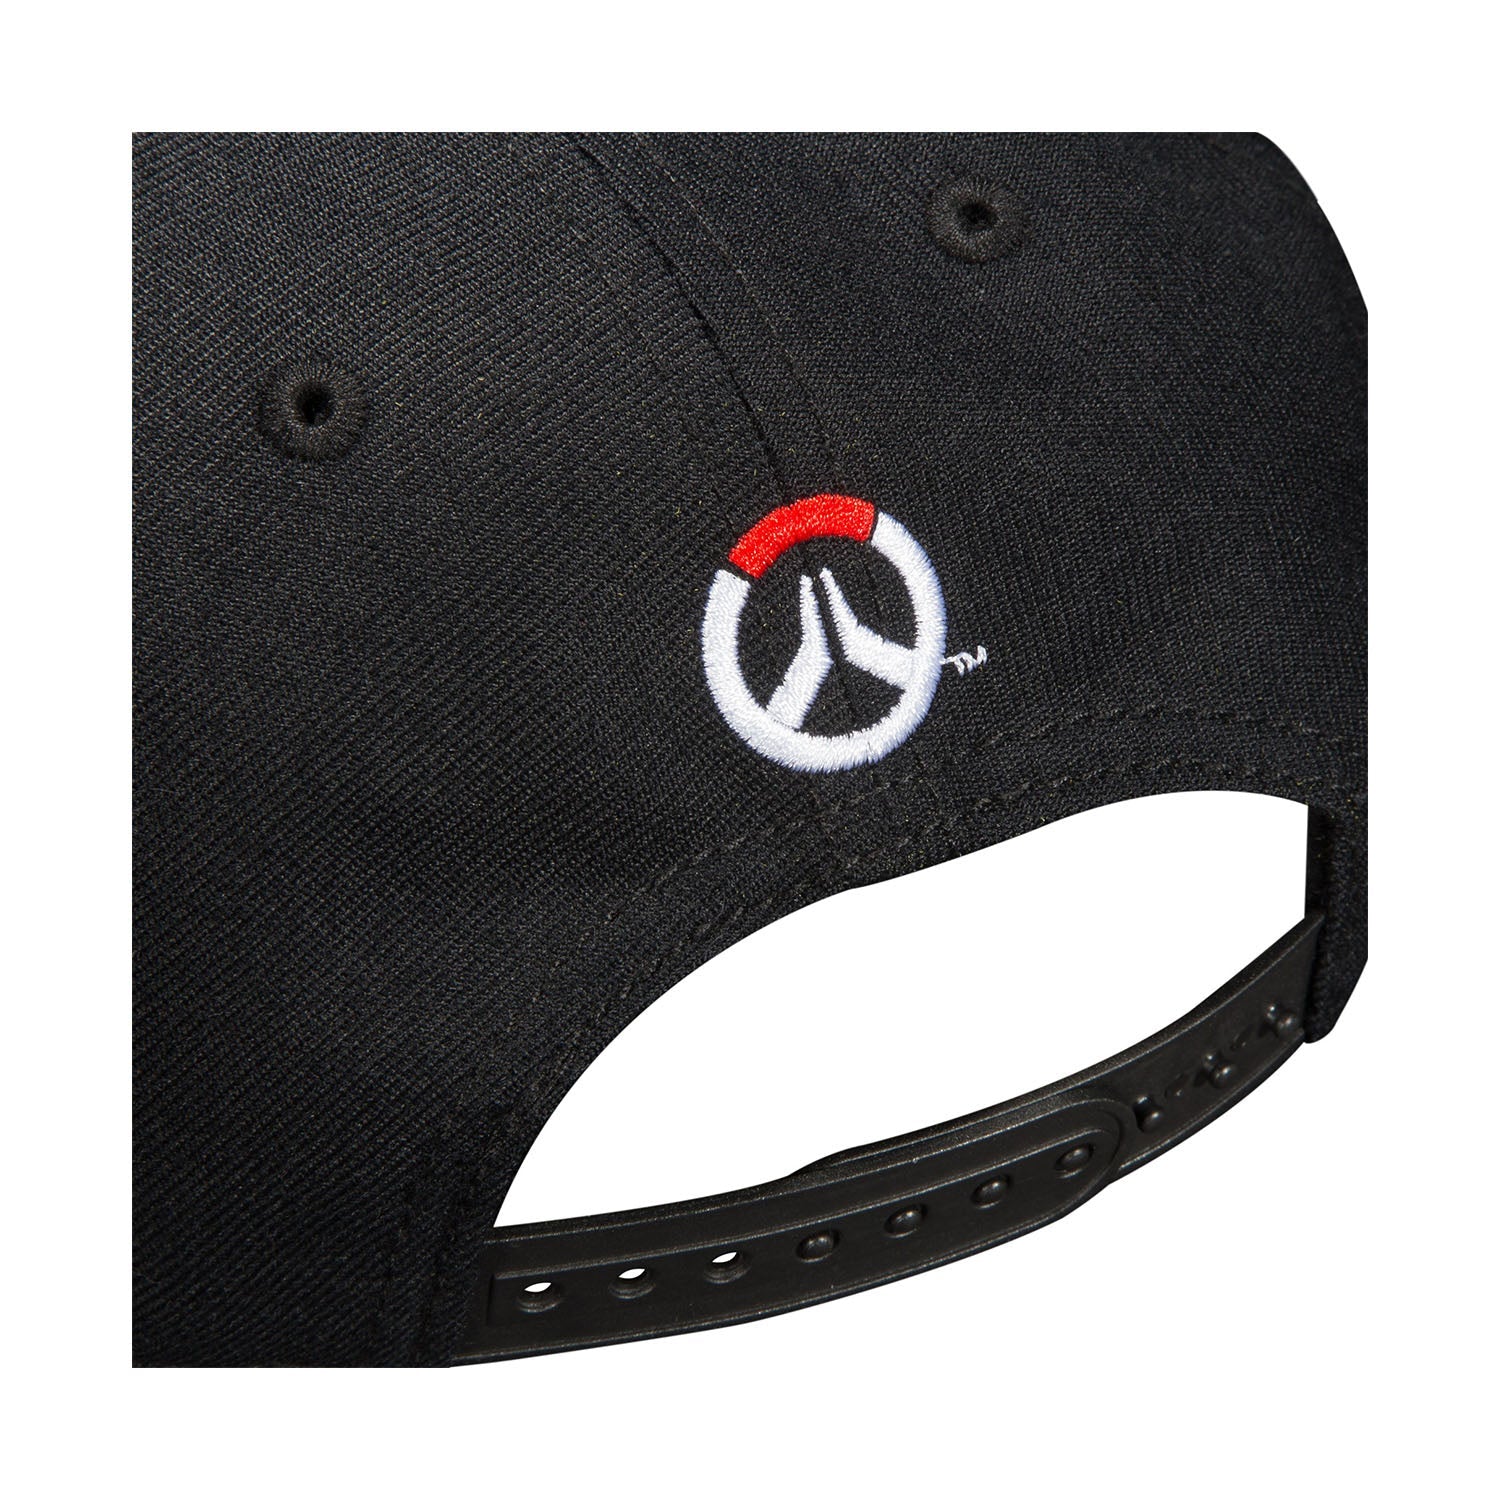 Overwatch Back from the Grave J!NX Black Snapback Hat - Back View